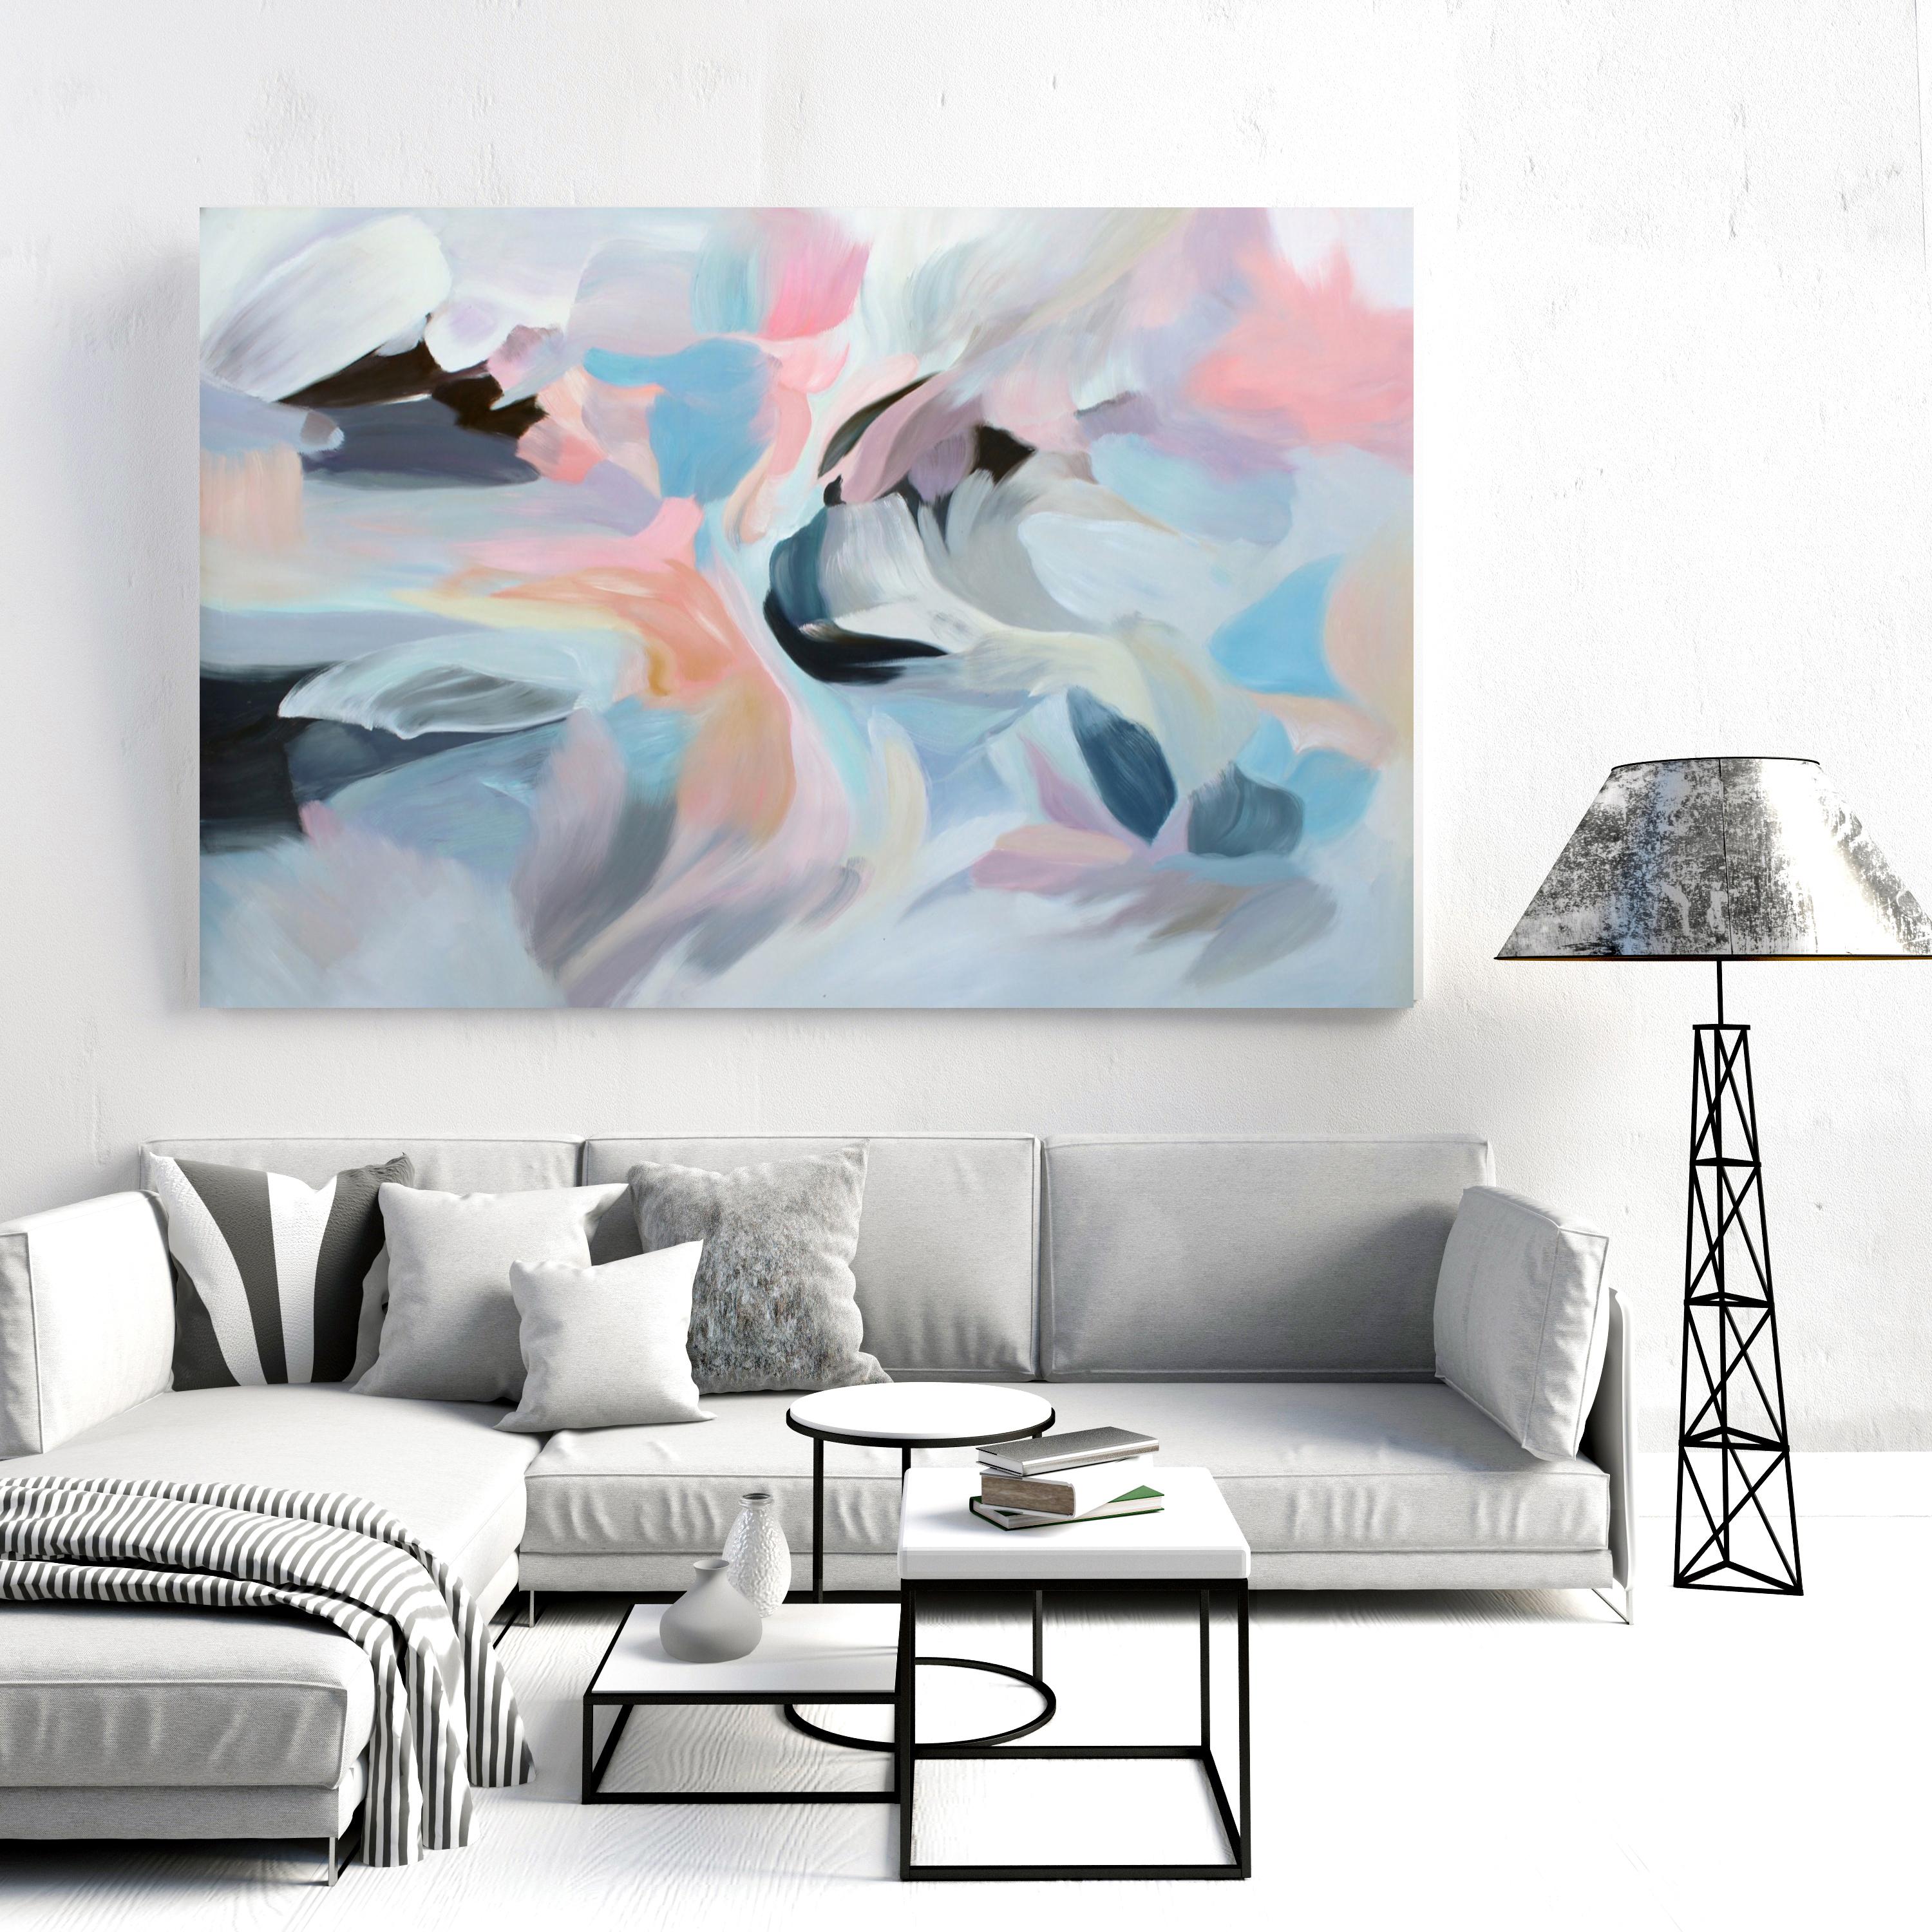 Vibrant Abstraction - Large Blue Pink Acrylic Painting, Display of Sensitivity